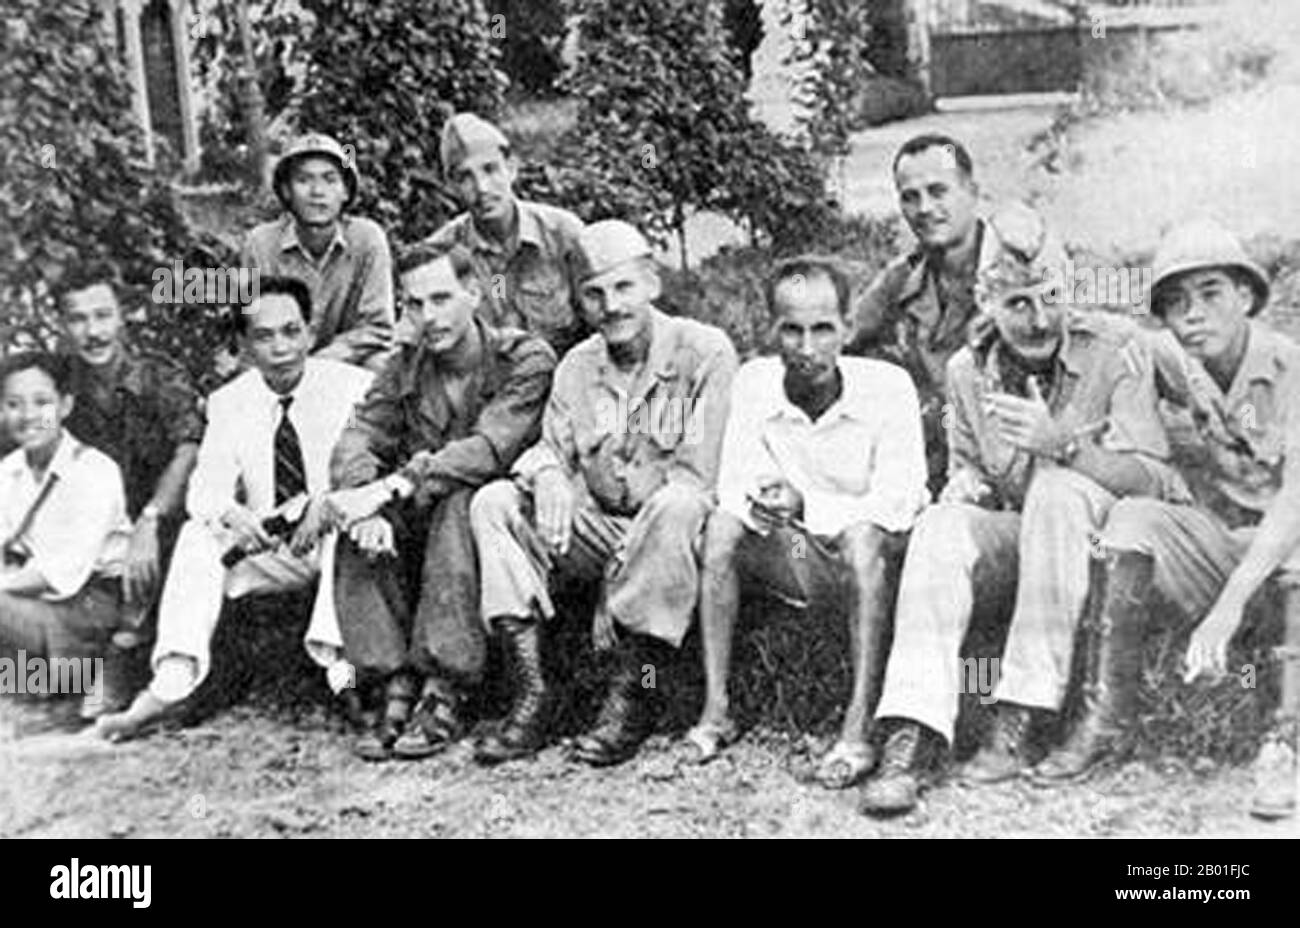 Vietnam: Indistinct but historically significant pictures of Vo Nguyen Giap and Ho Chi Minh with American OSS officers including Lieutenant Colonel Peter Dewey (centre), OSS Deer Team, c. 1945.  Dewey arrived on September 4, 1945 in Saigon to head a seven-man OSS team 'to represent American interests' and collect intelligence. Working with the Viet Minh, he arranged the repatriation of 4,549 Allied POWs, including 240 Americans, from two Japanese camps near Saigon, code named Project Embankment. Stock Photo